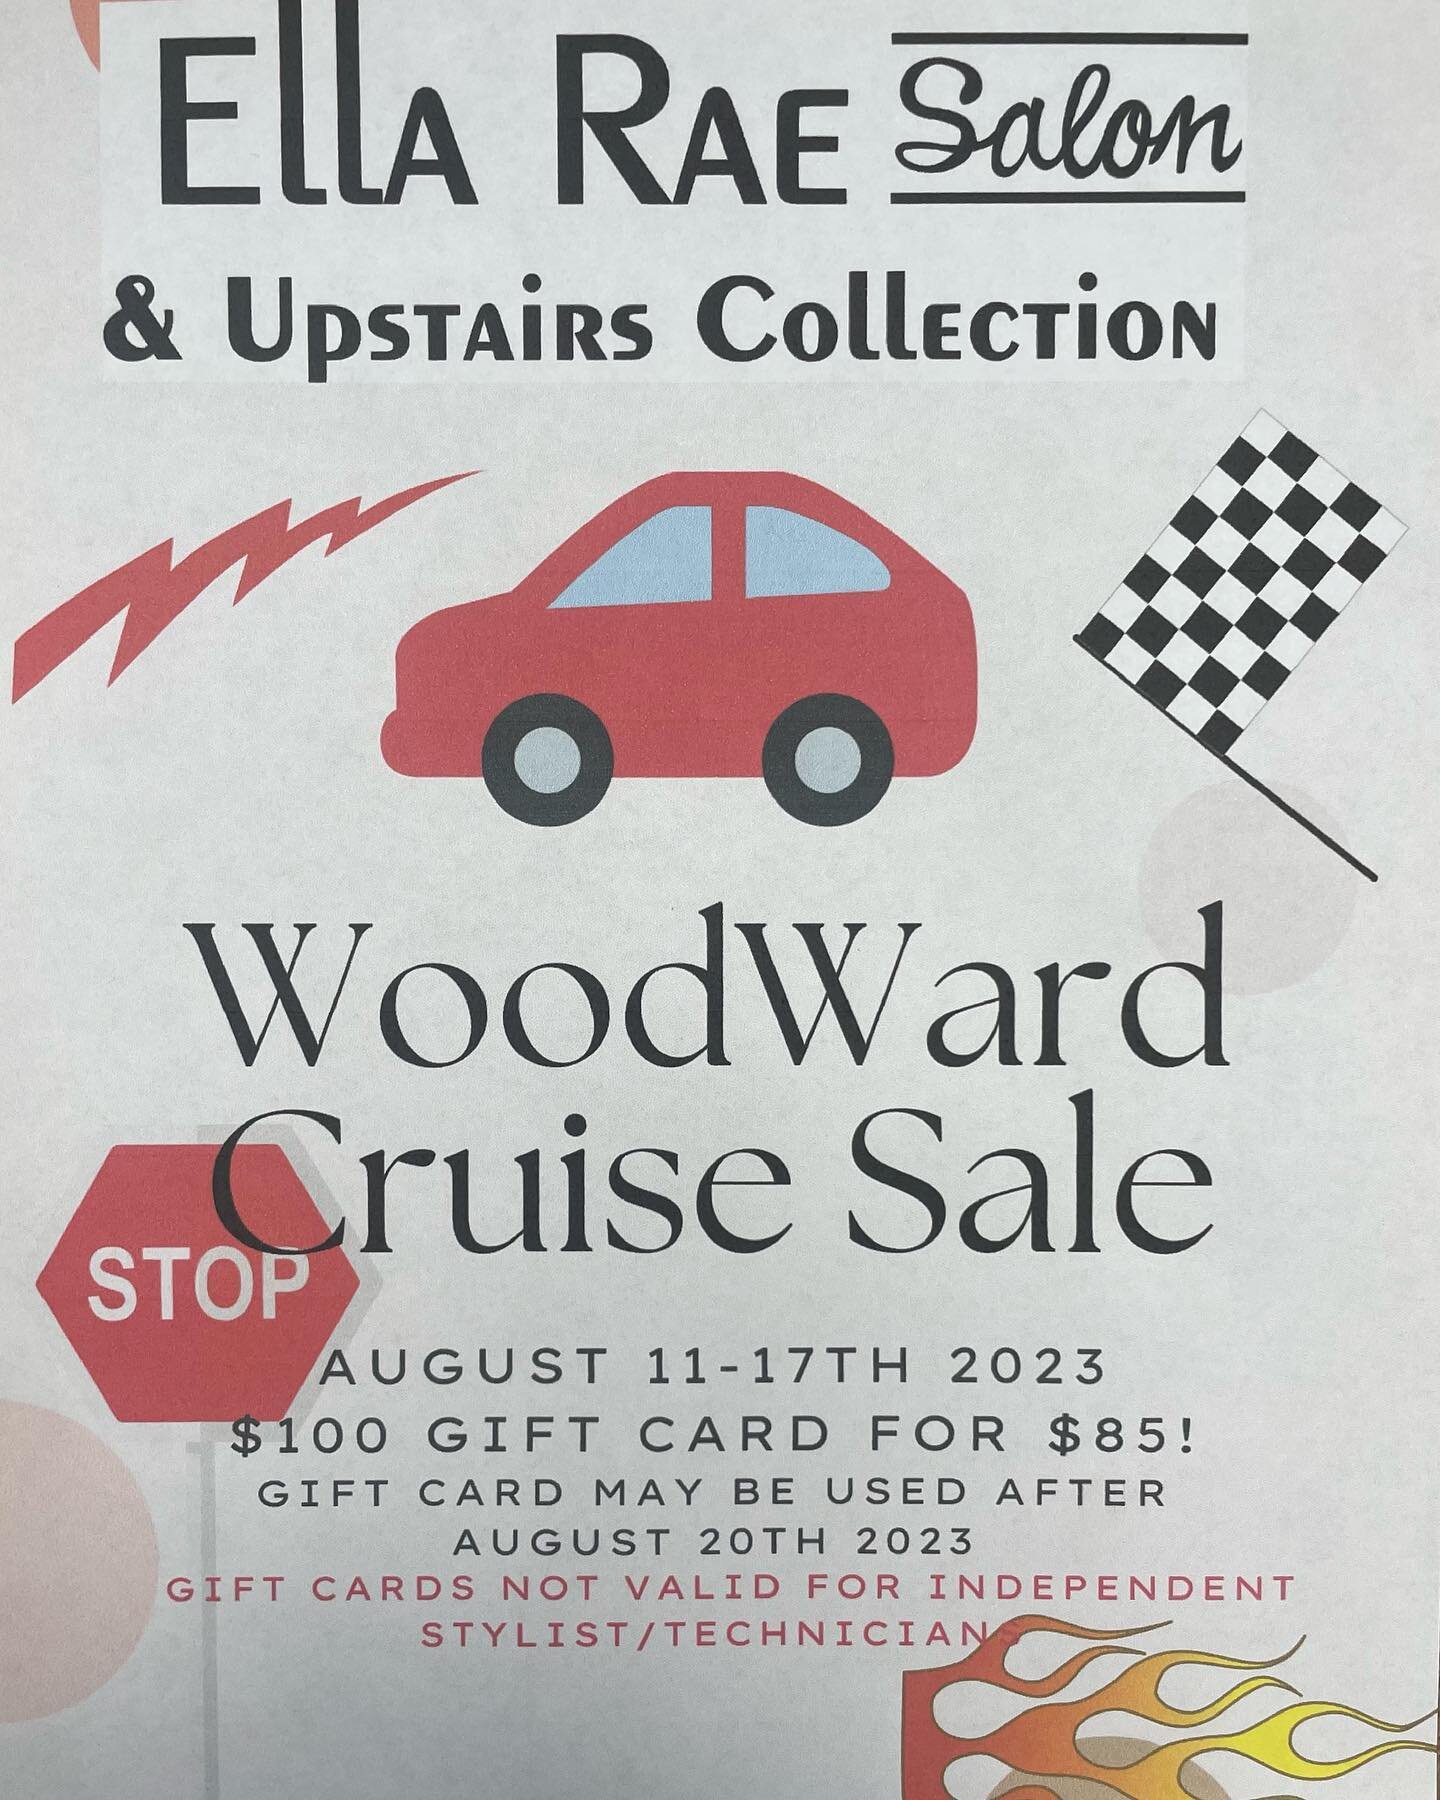 Getting ready for the woodward cruise?!? 
Stop in the salon or give us a call 2482681320 to get a $100 gift card for $85!! 
Sale ends August 17th. 🚙 🫶🏼